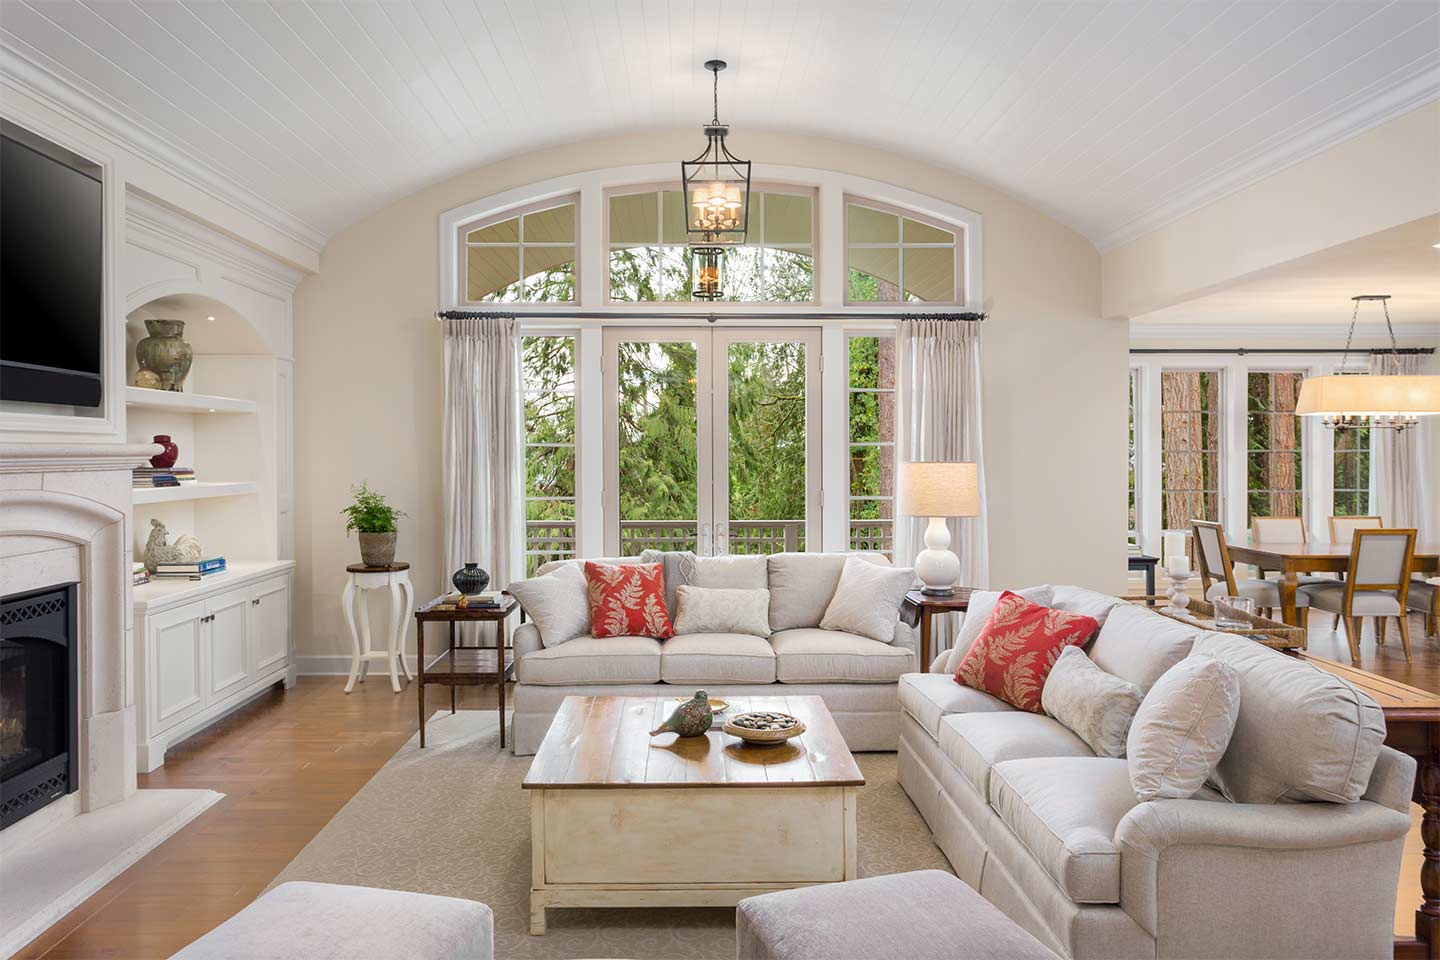 gorgeous French door flanked by two side lites and an arched transom providing an expansive view to a beautiful garden